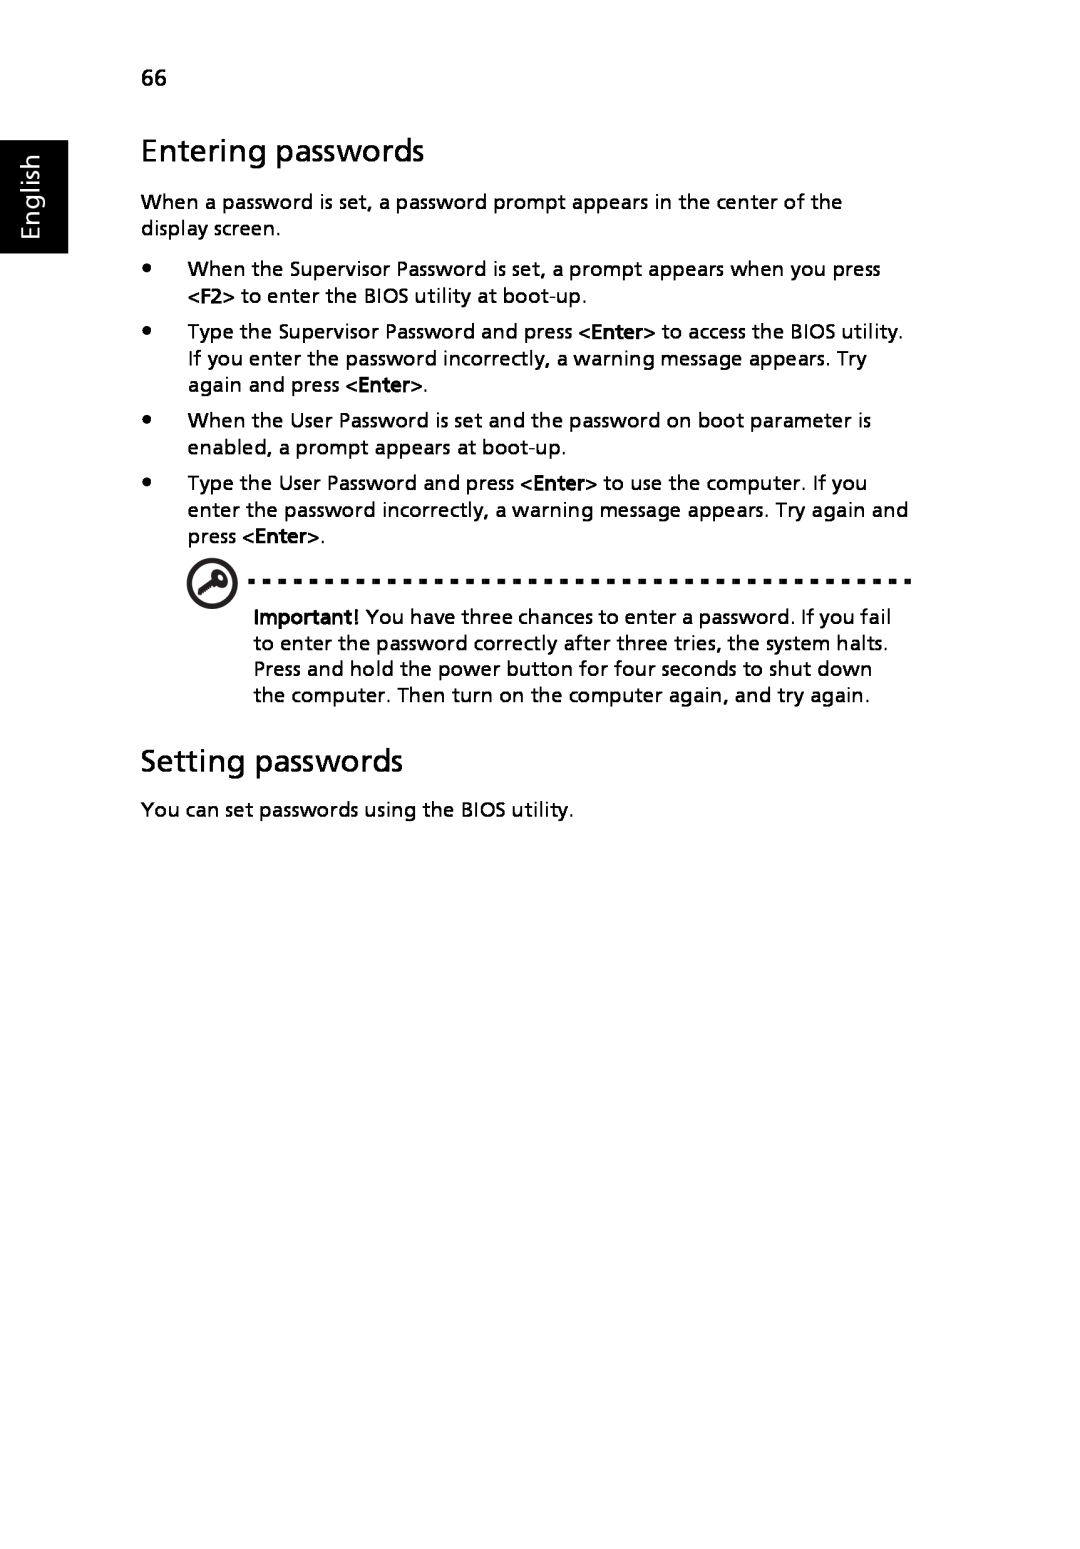 Acer 4920, MS2219 manual Entering passwords, Setting passwords, English 